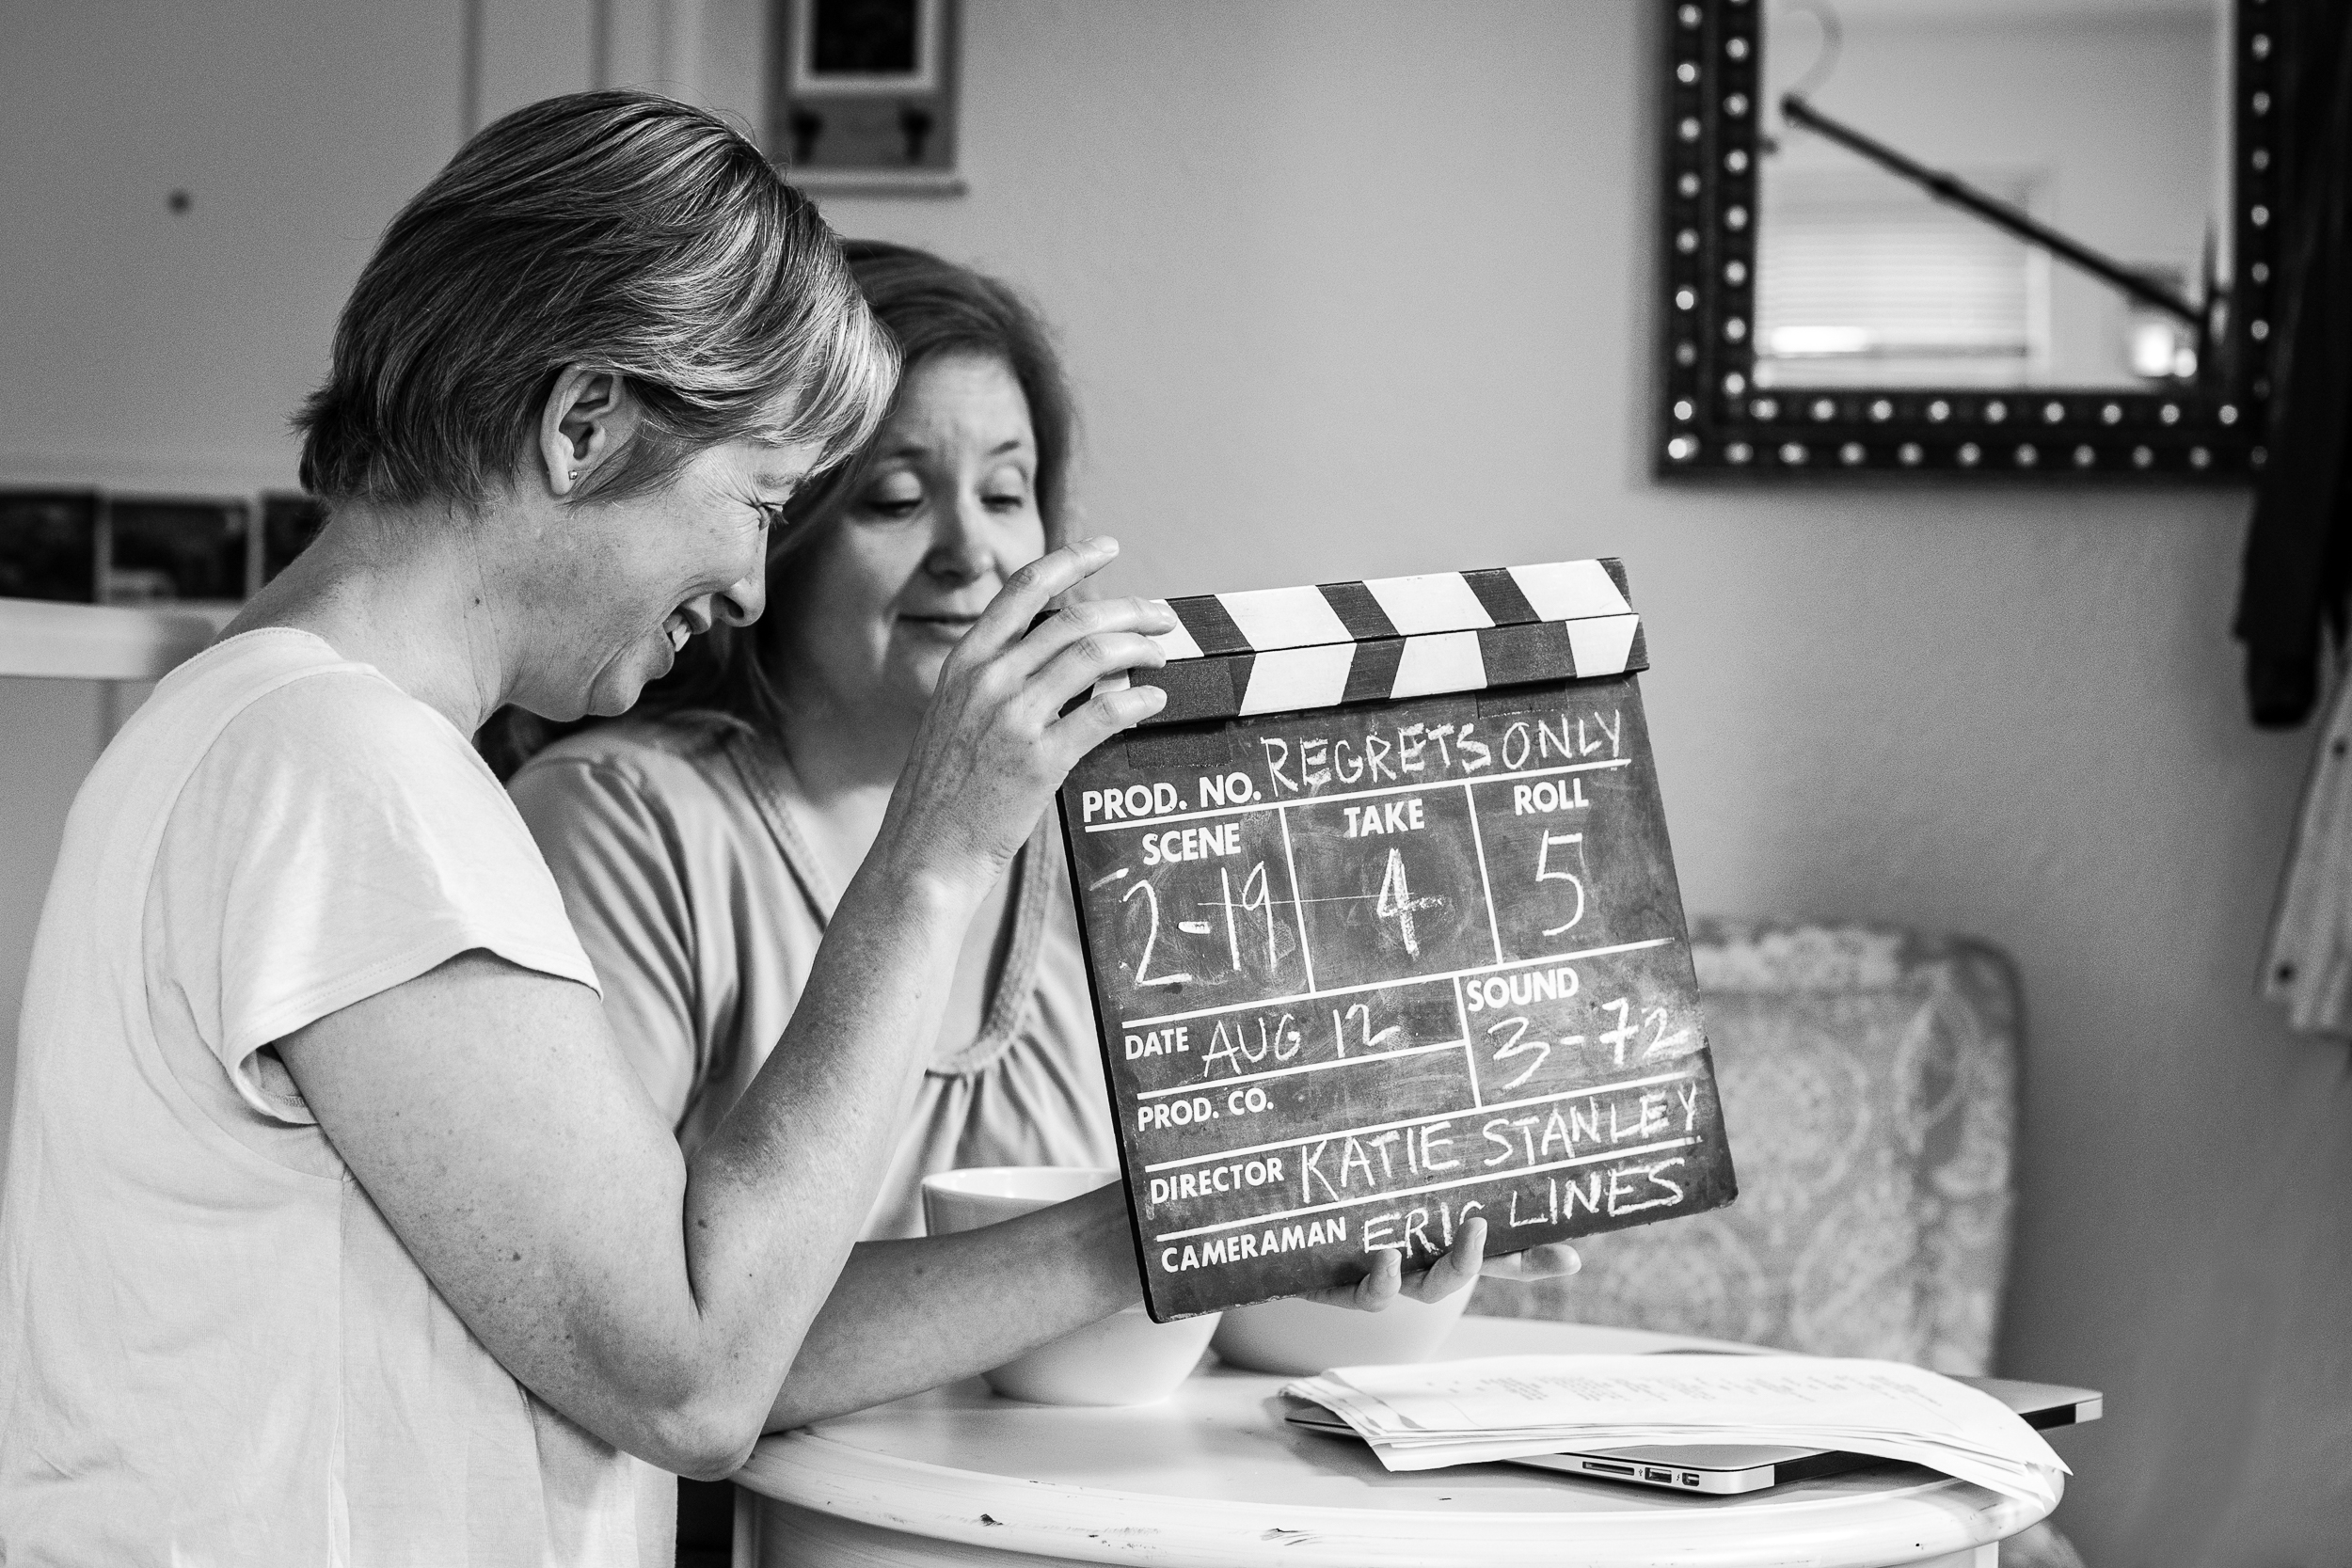 Day 4: Chrissy Steele and Trish Brown with the clapboard.